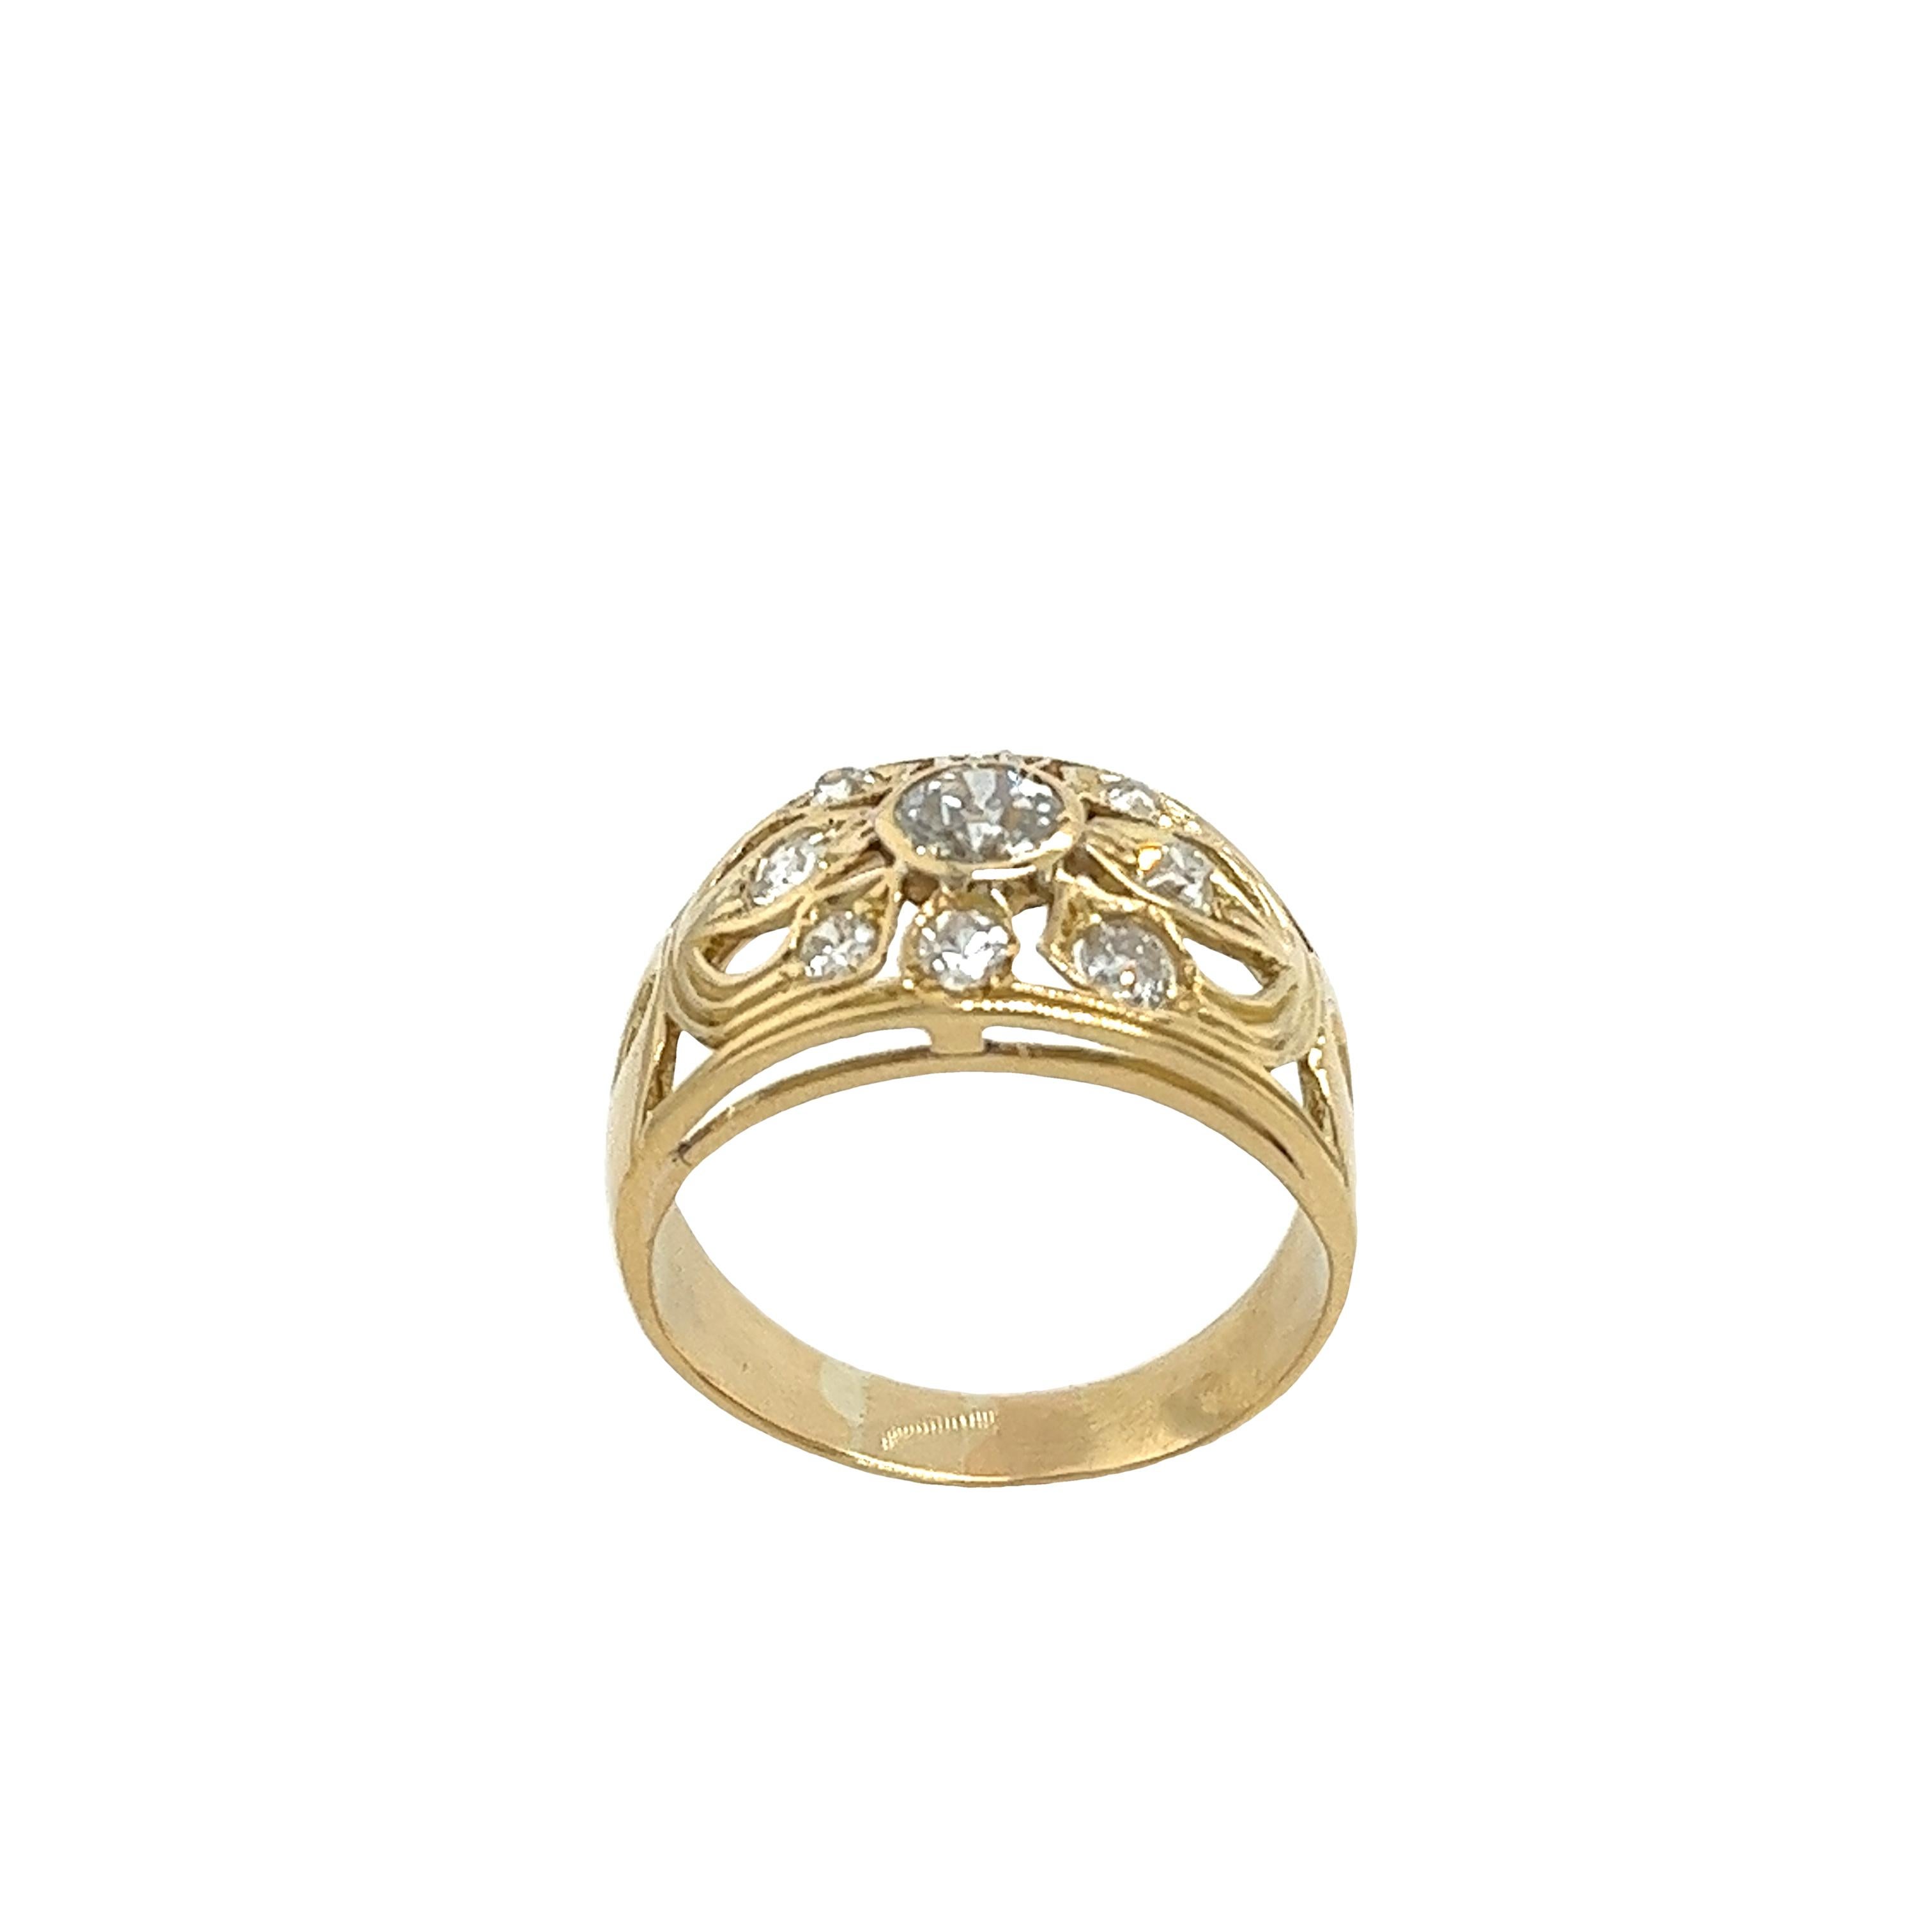 14ct YellGold Diamond Dress Ring Set With 0.60ct of Natural Diamonds For Sale 3